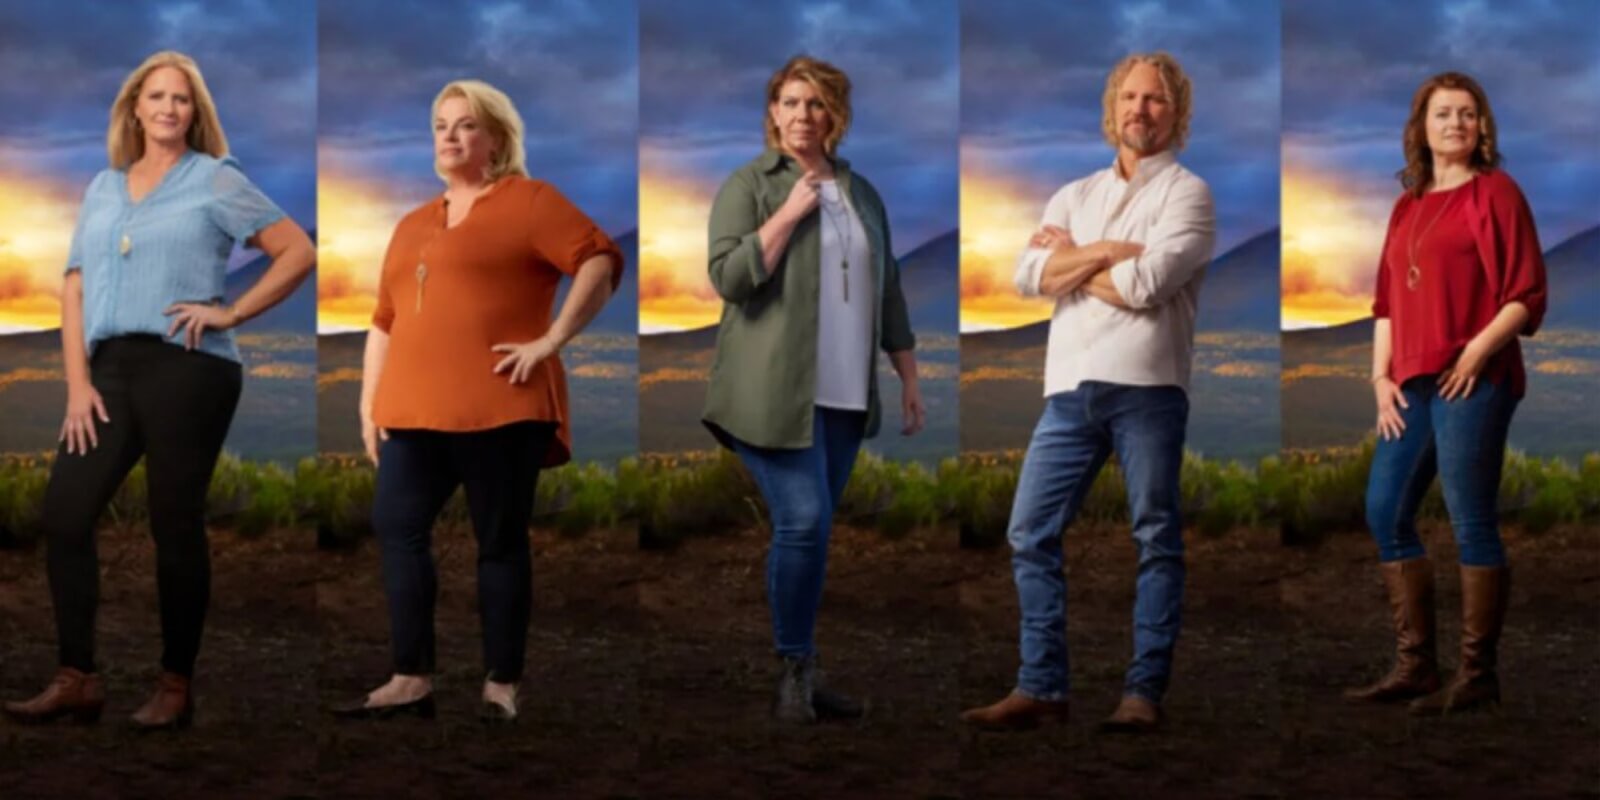 The cast of season 18 of TLC's 'Sister Wives' includes Christine, Janelle, Meri, Kody, and Robyn Brown.